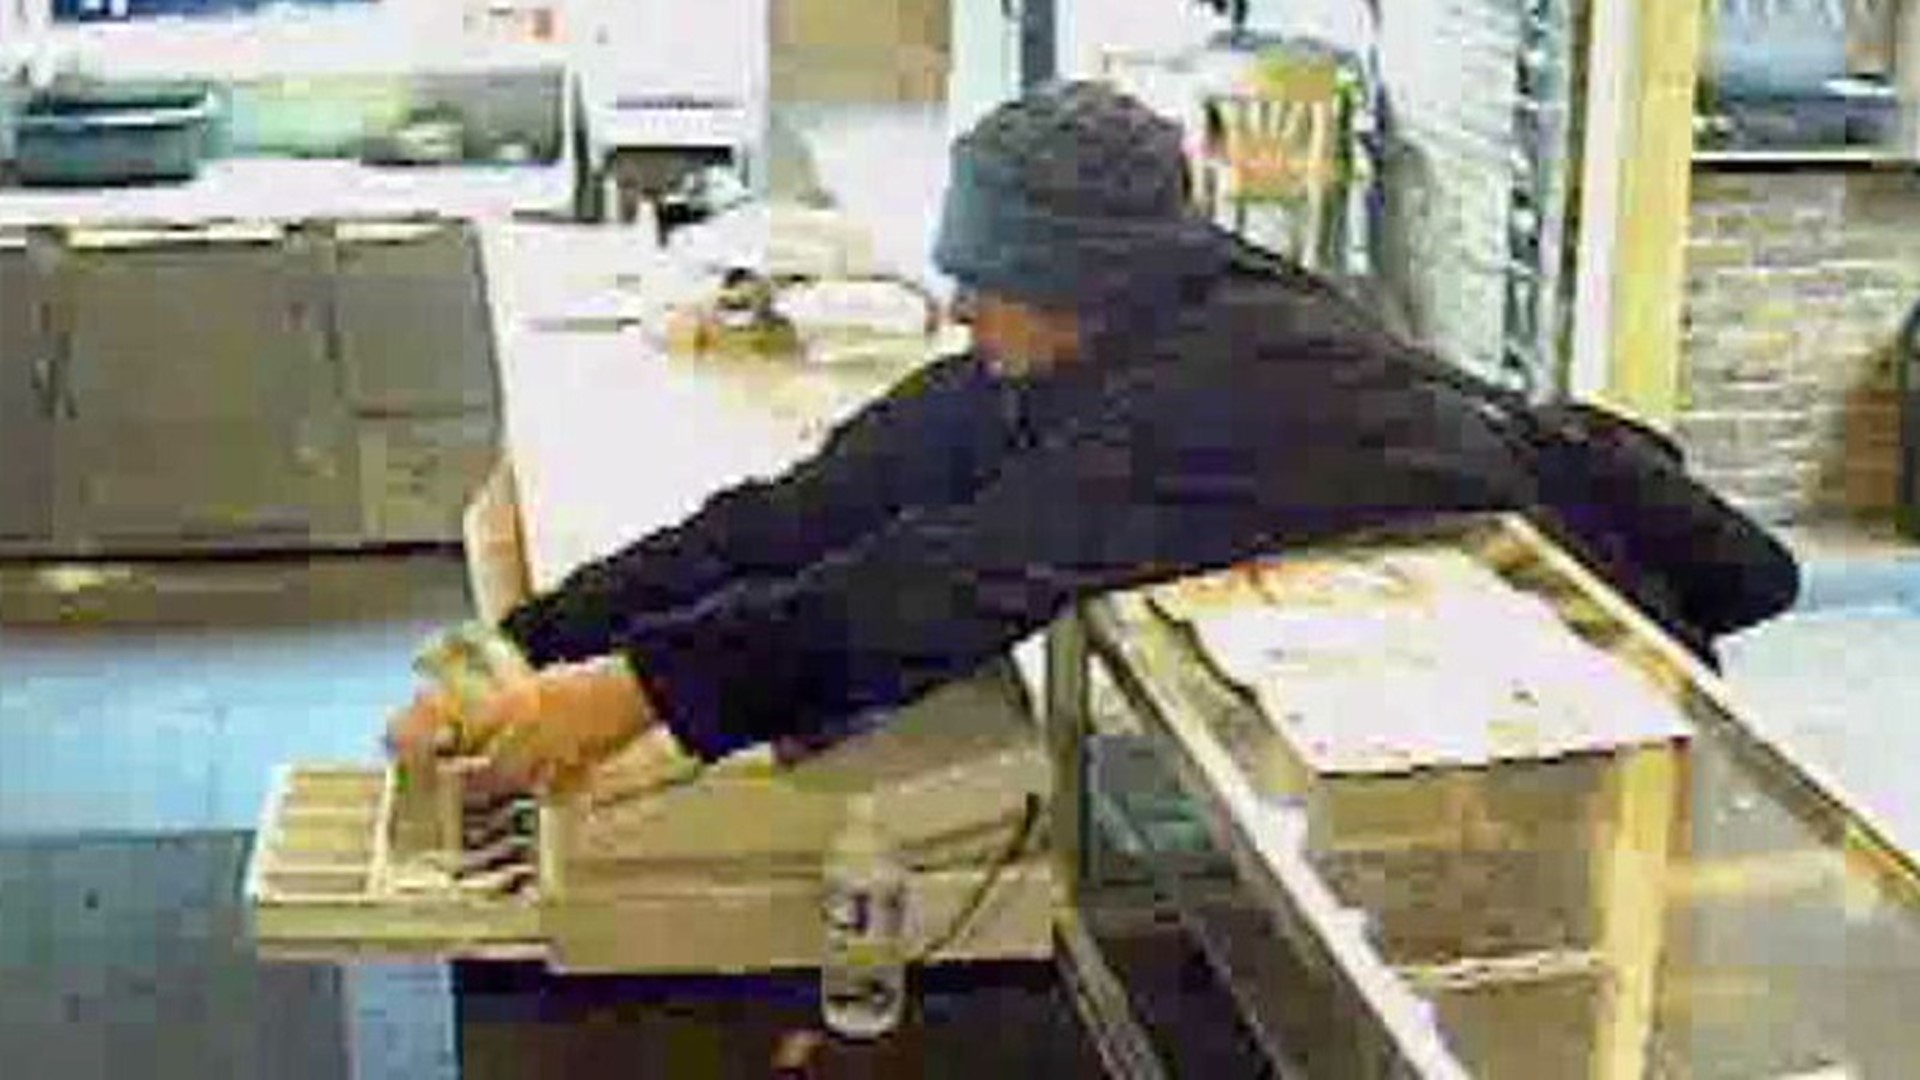 Thief Caught On Camera Stealing From Cash Register